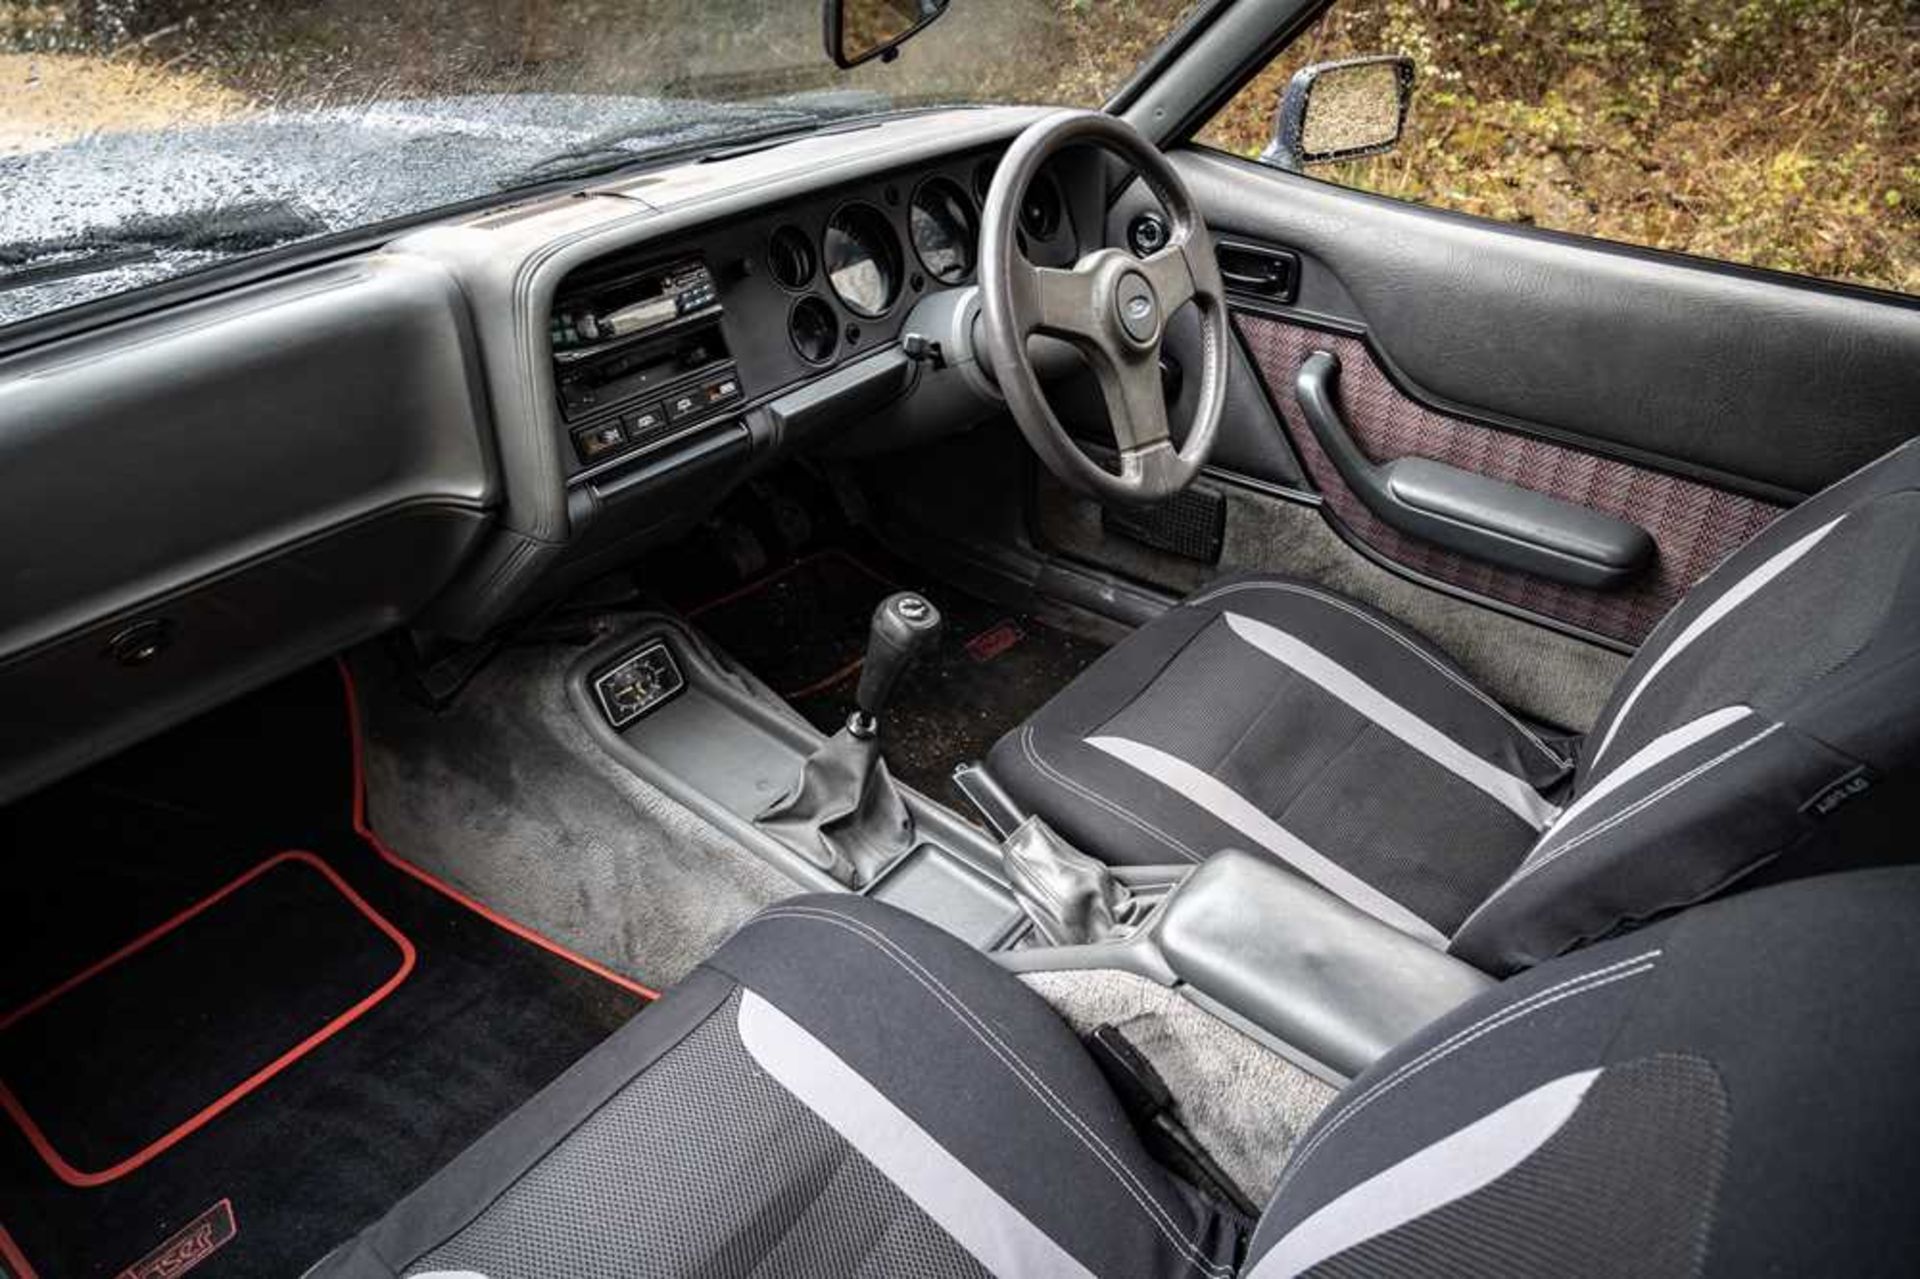 1985 Ford Capri Laser 2.0 Litre Warranted 55,300 miles from new - Image 35 of 67